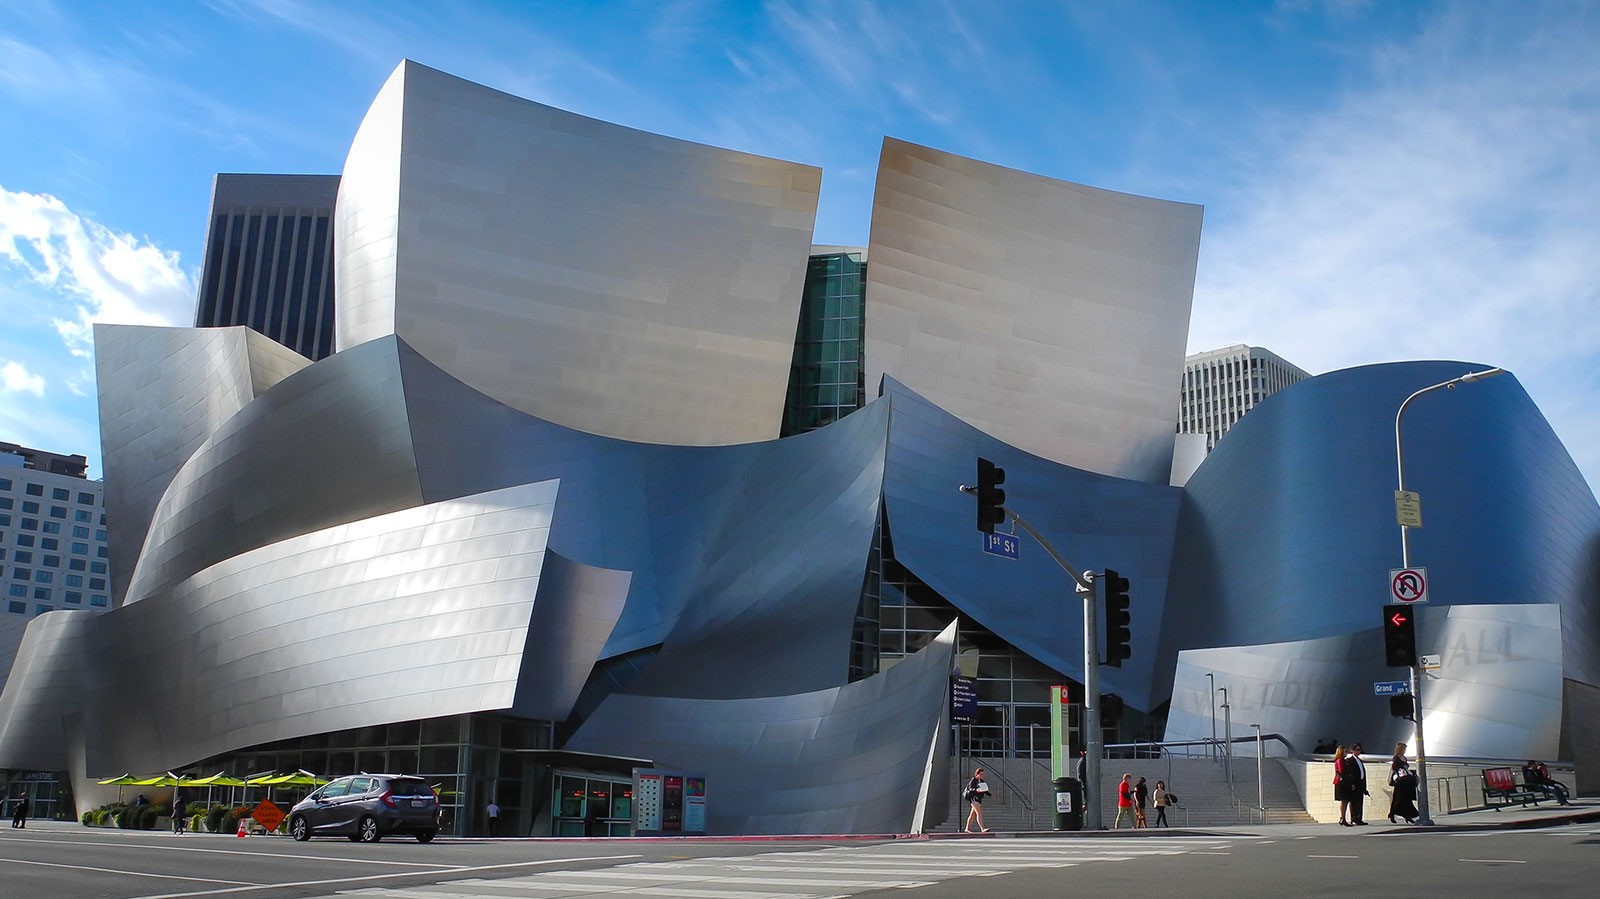 Walt Disney Concert Hall by Frank O Gehry: The greatest building of our time - Sheet2